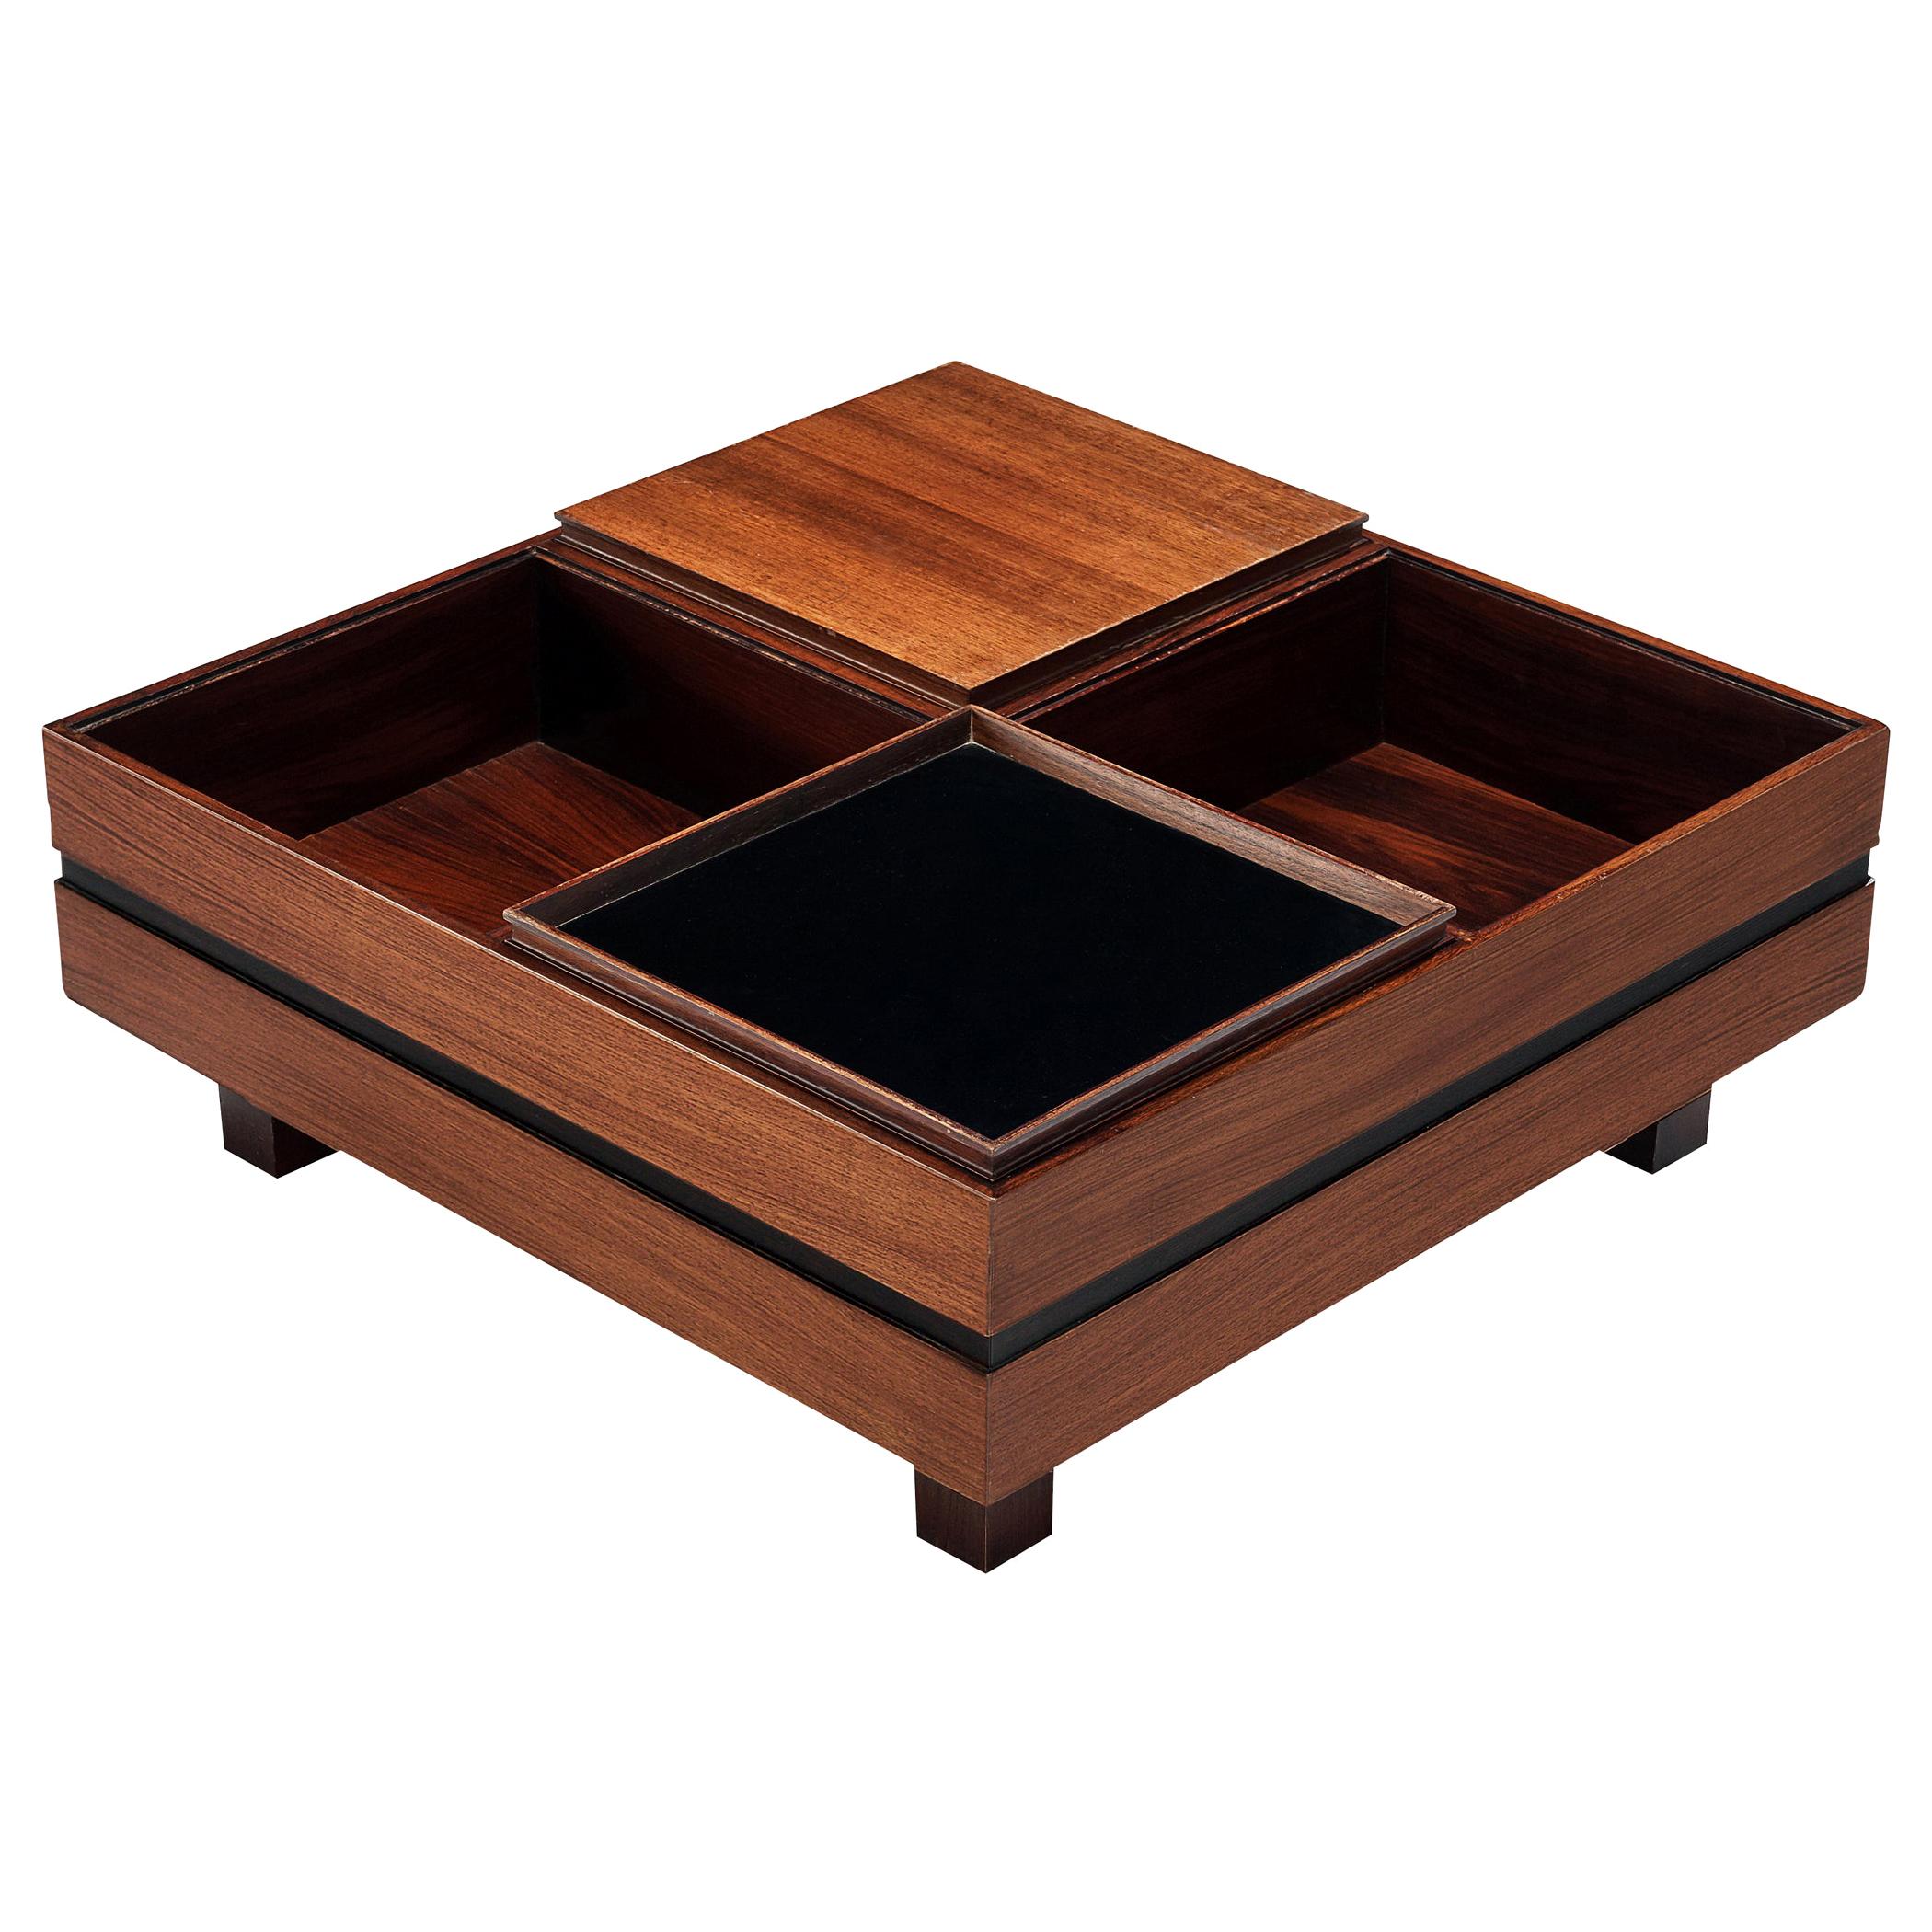 Claudio Salocchi Coffee Table in Rosewood and Walnut